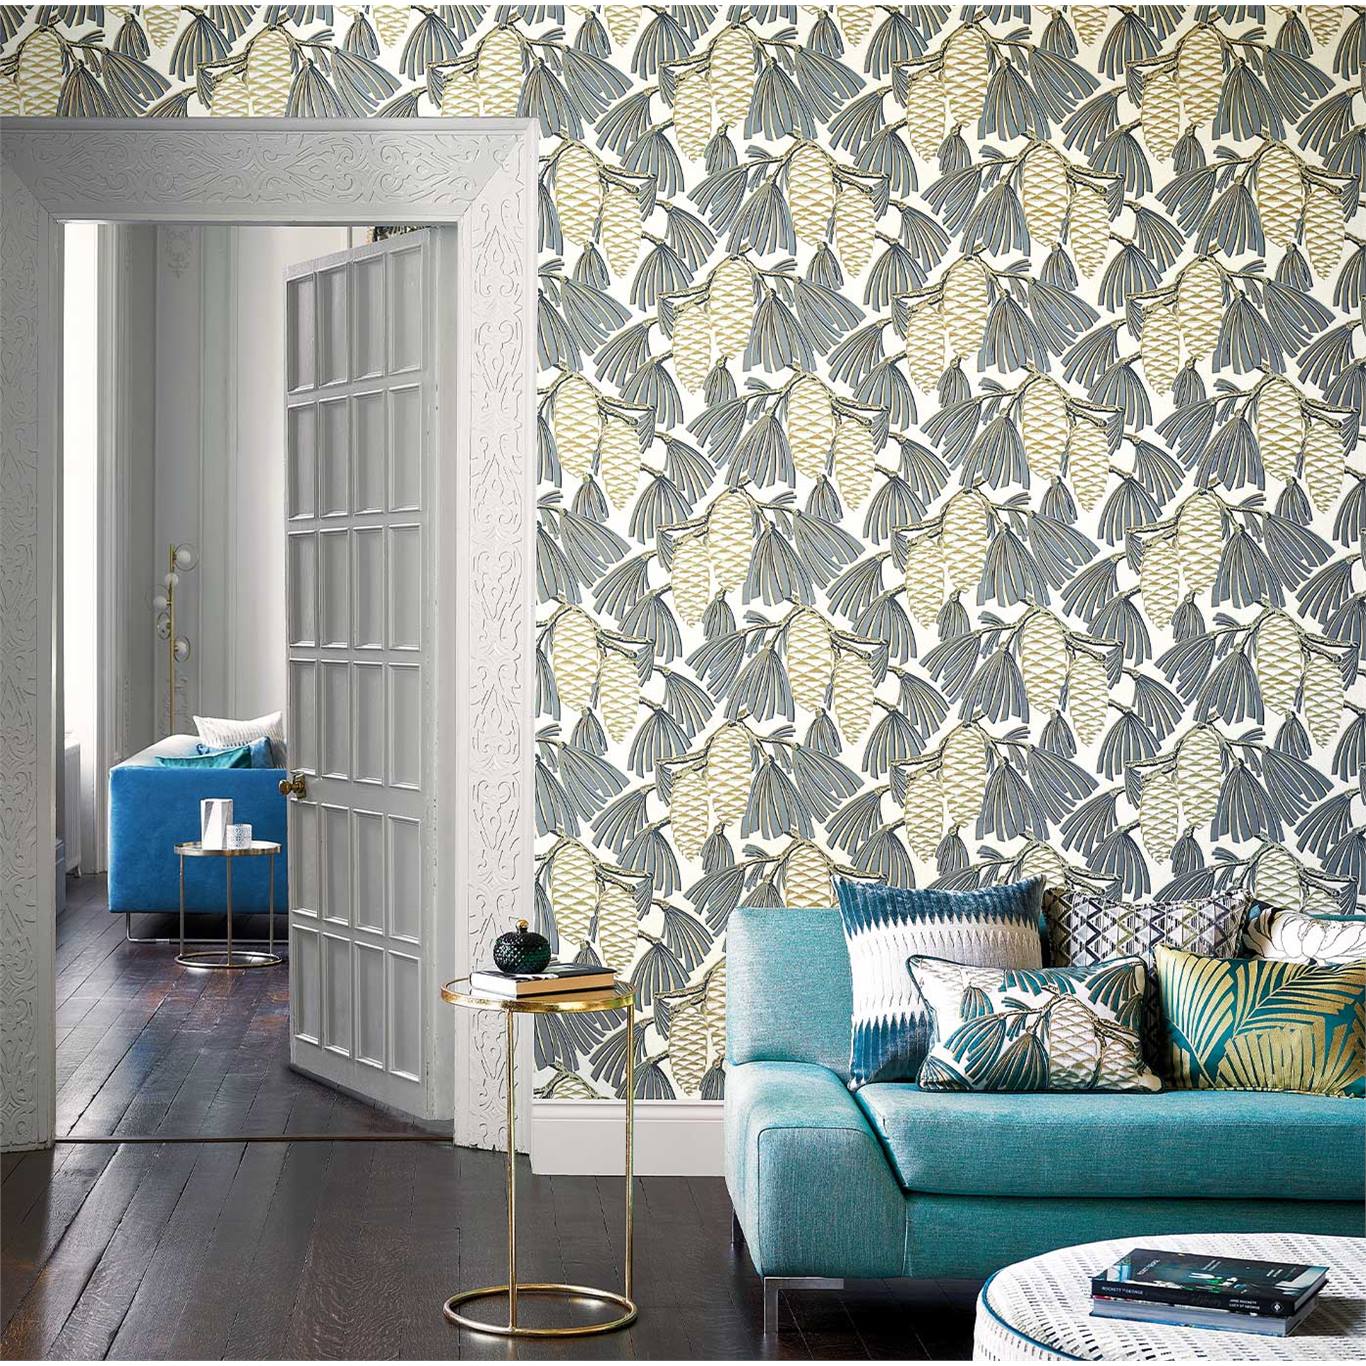 Foxley, A Wallpaper By Harlequin, Part Of The Salinas - Harlequin Foxley - HD Wallpaper 